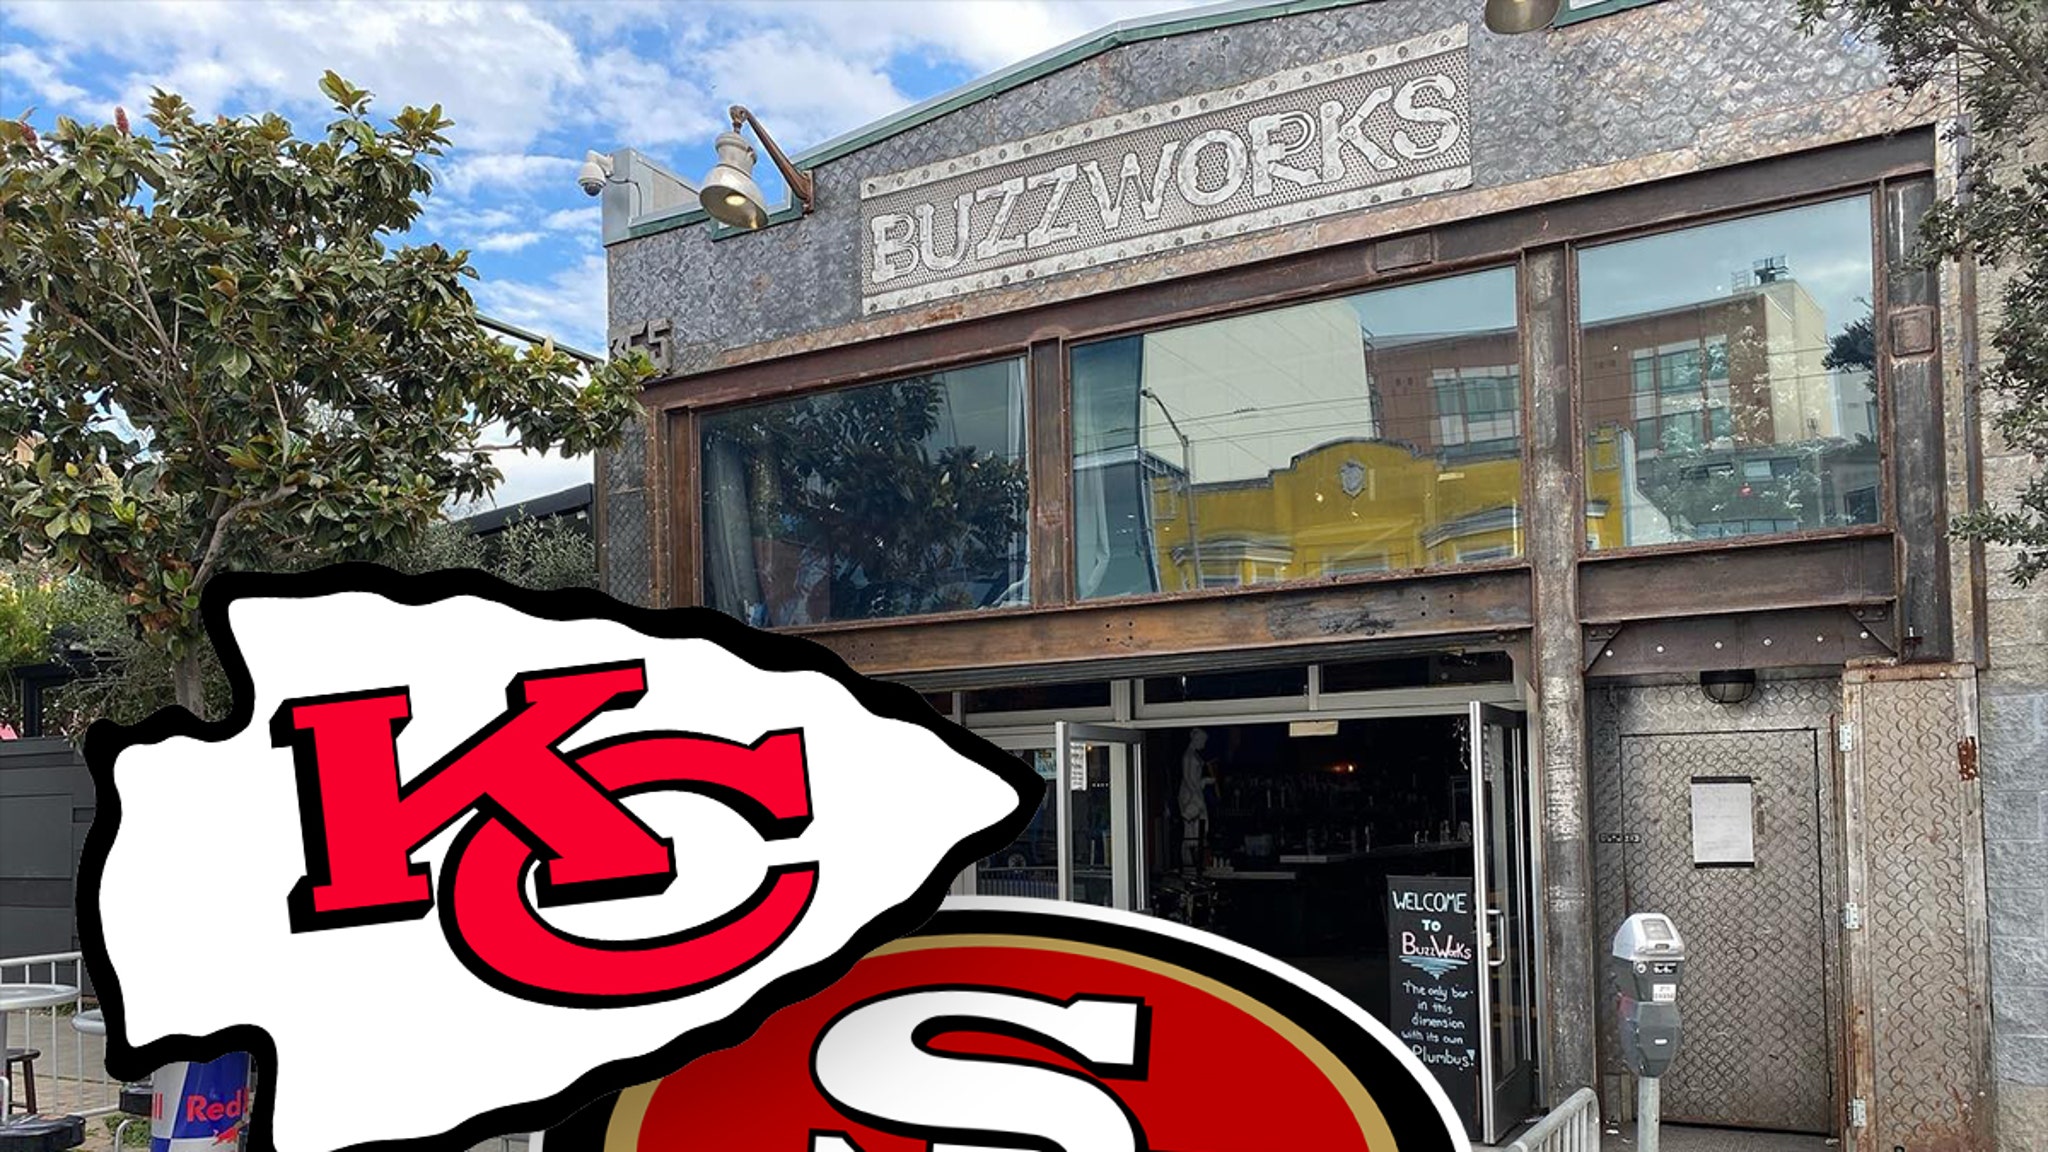 San Fran Chiefs-friendly sports bar says 49ers fans welcome, with Catch